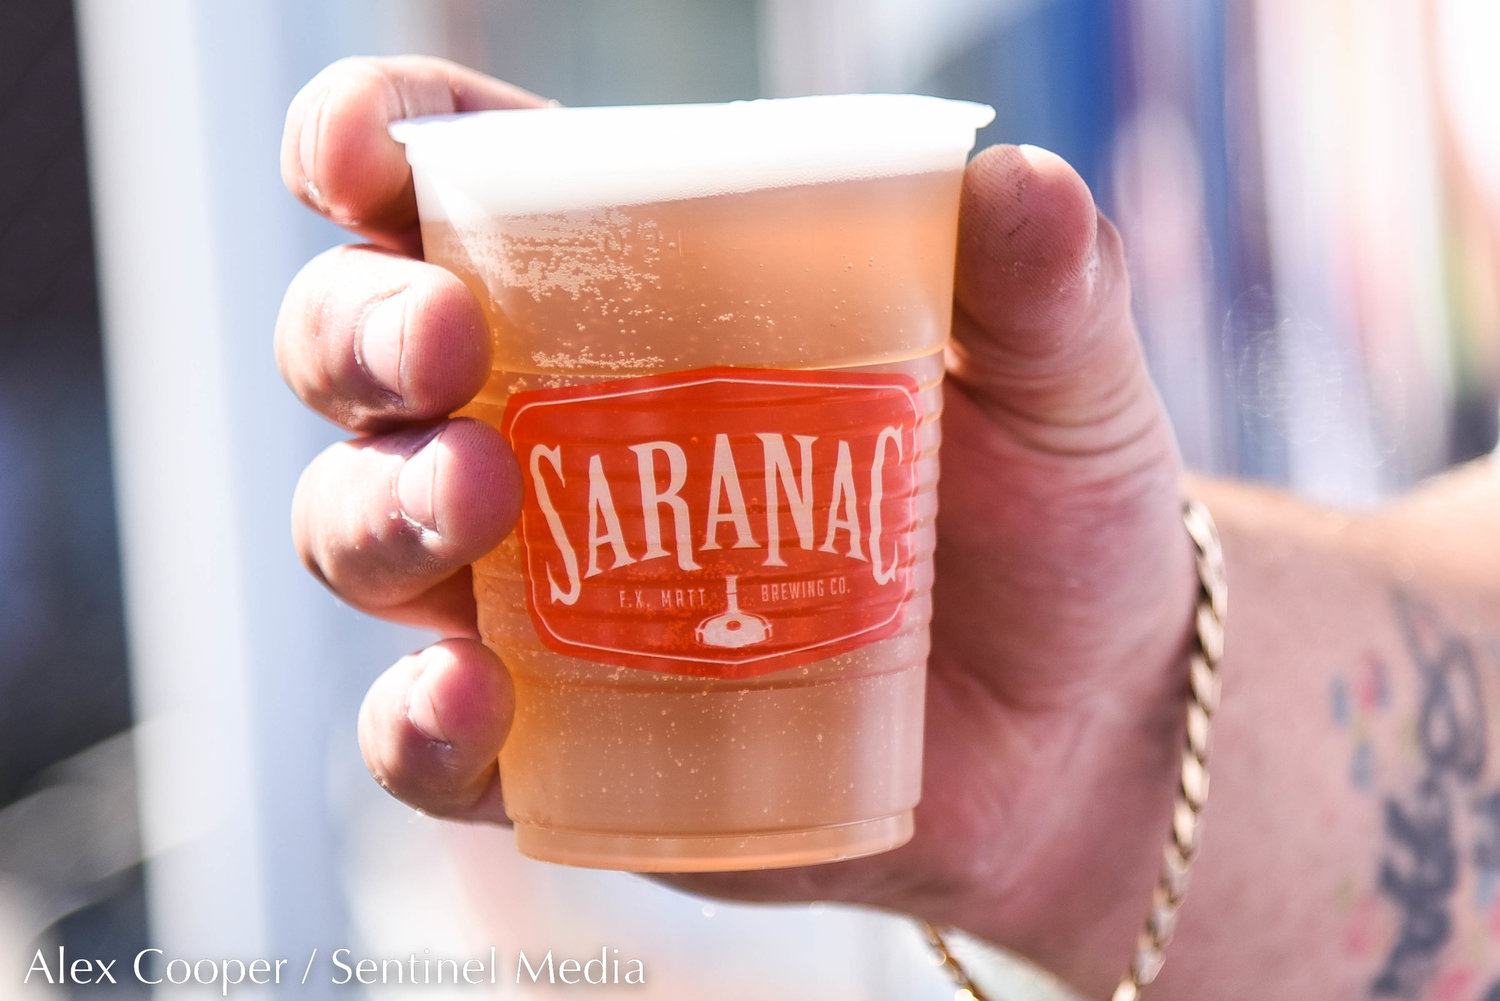 A runner drinks a cold Utica Club at the Saranac Post Race Party following the 45th Boilermaker Road Race in Utica.